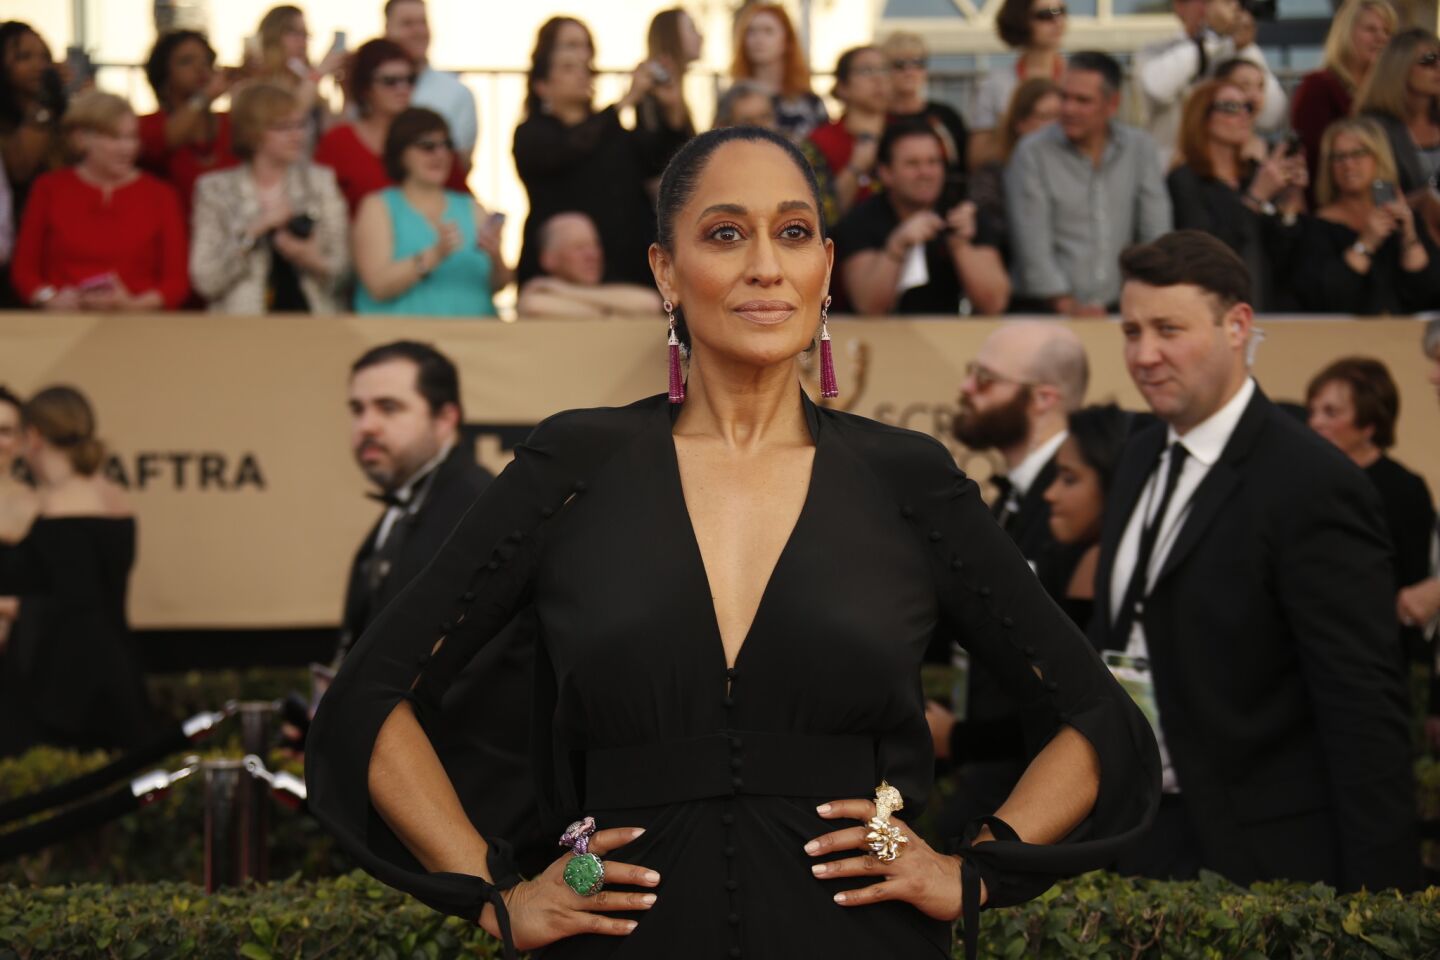 Tracee Ellis Ross is a nominee for "black-ish."